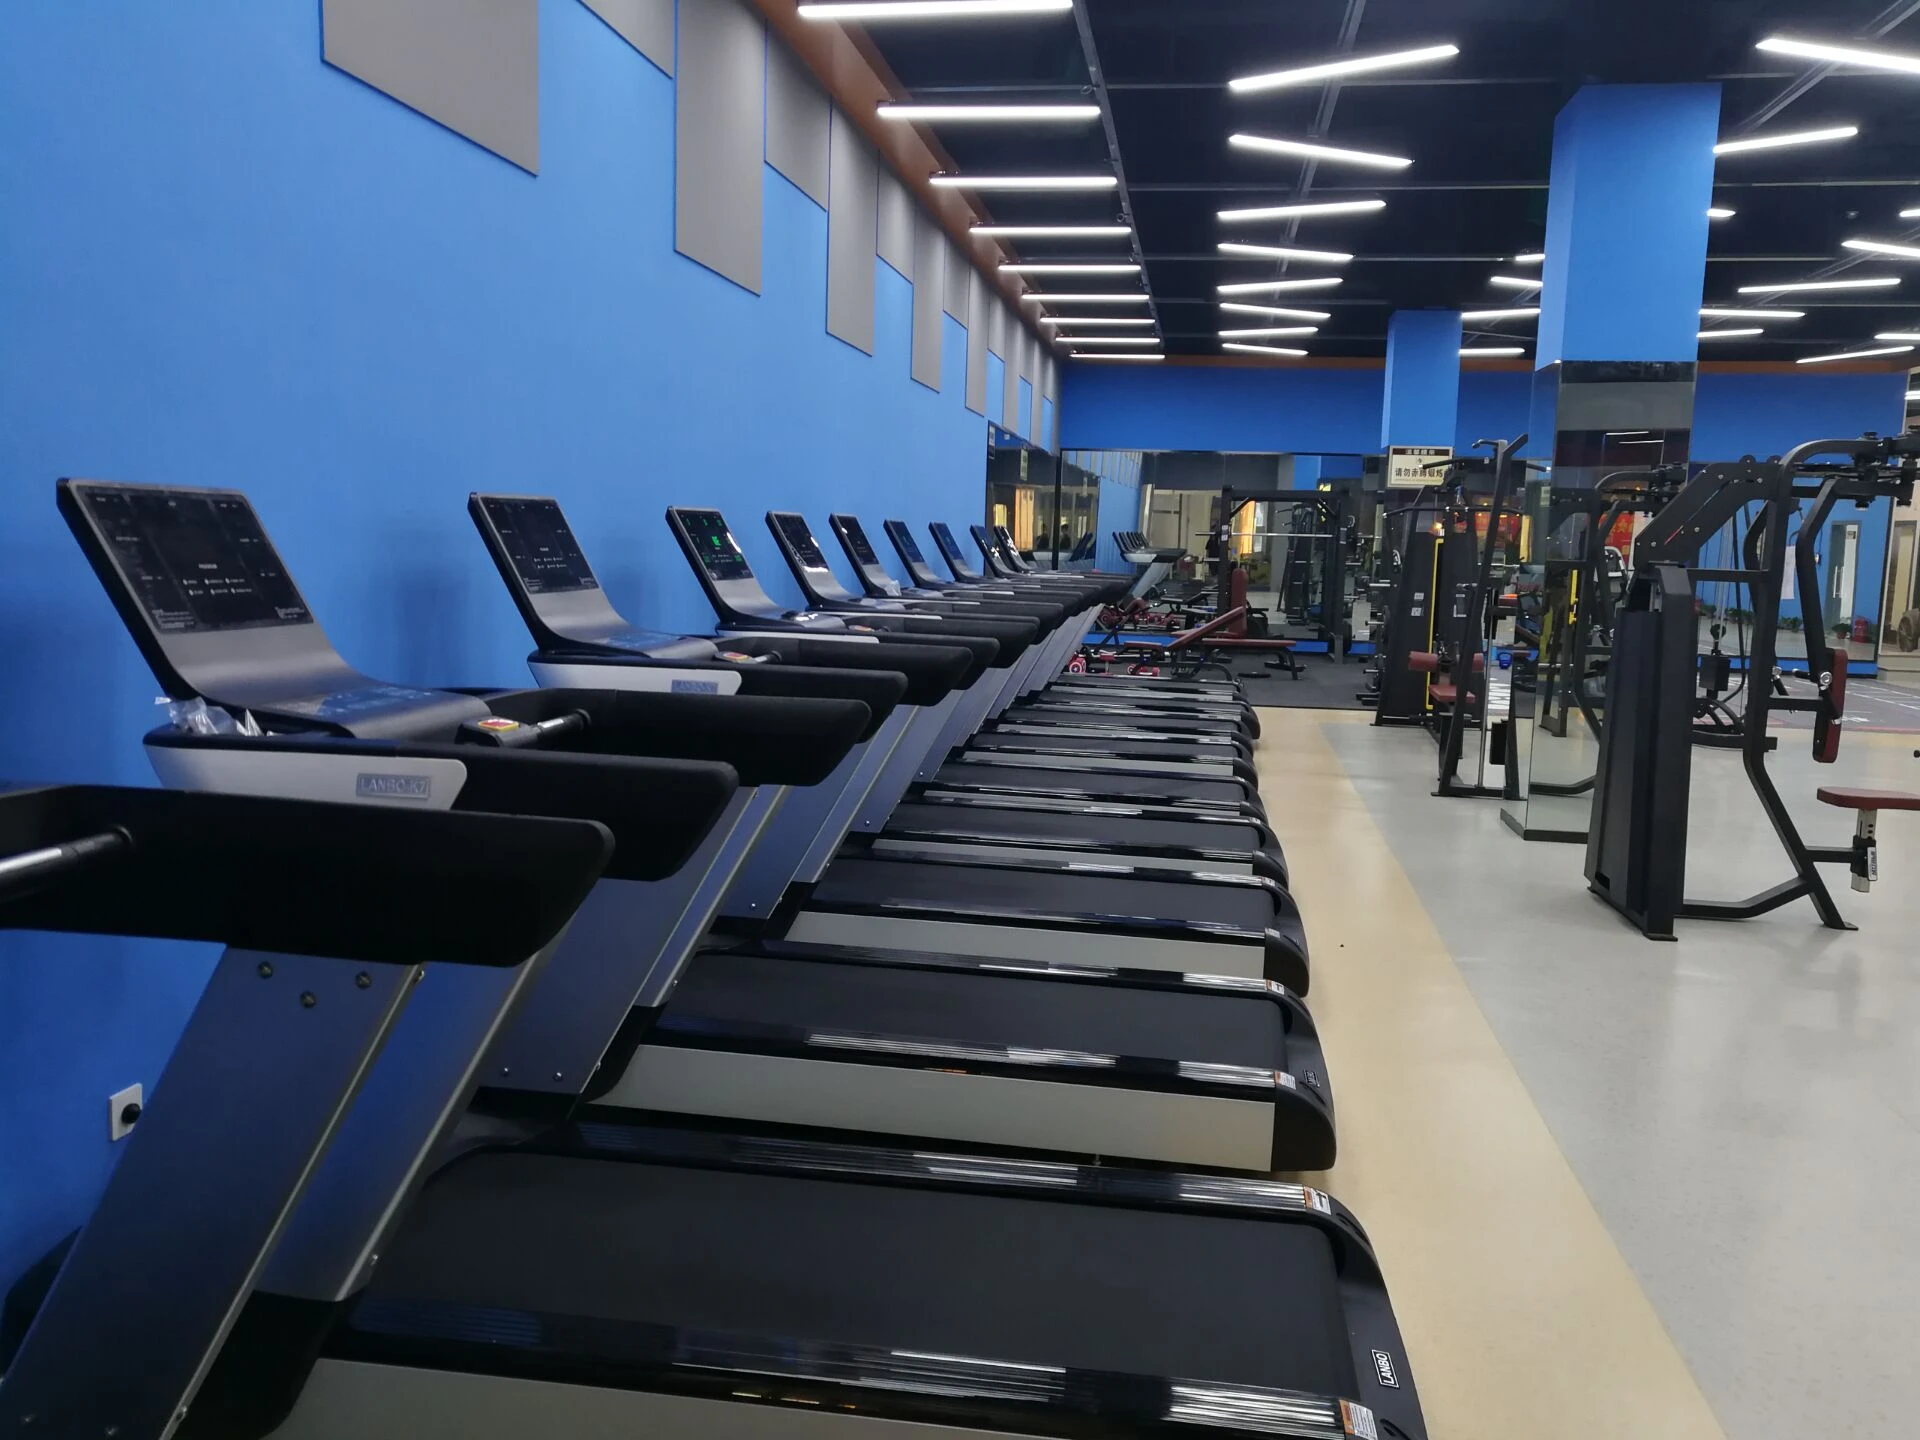 Shandong Dezhou Lanbo 18.5 TFT screen high quality commercial treadmill with aluminum alloy material/Running machine treadmill